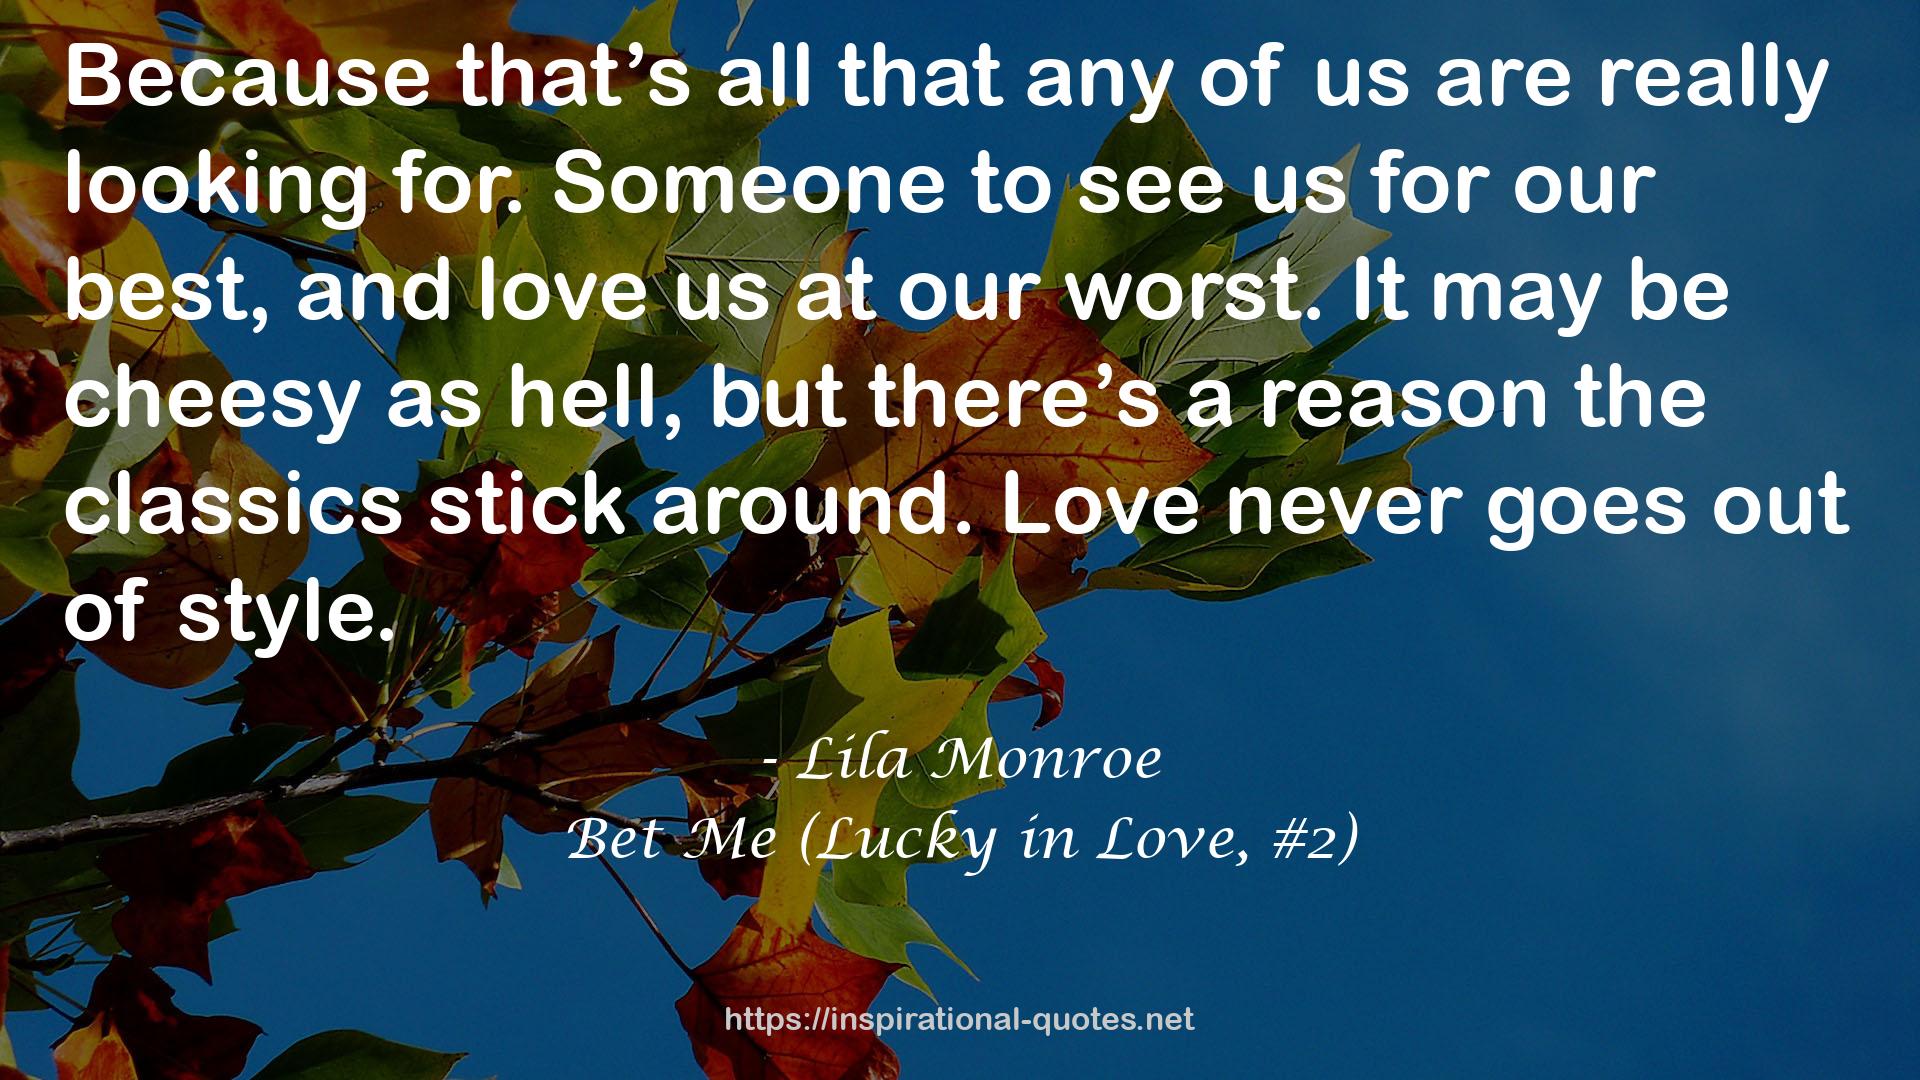 Bet Me (Lucky in Love, #2) QUOTES